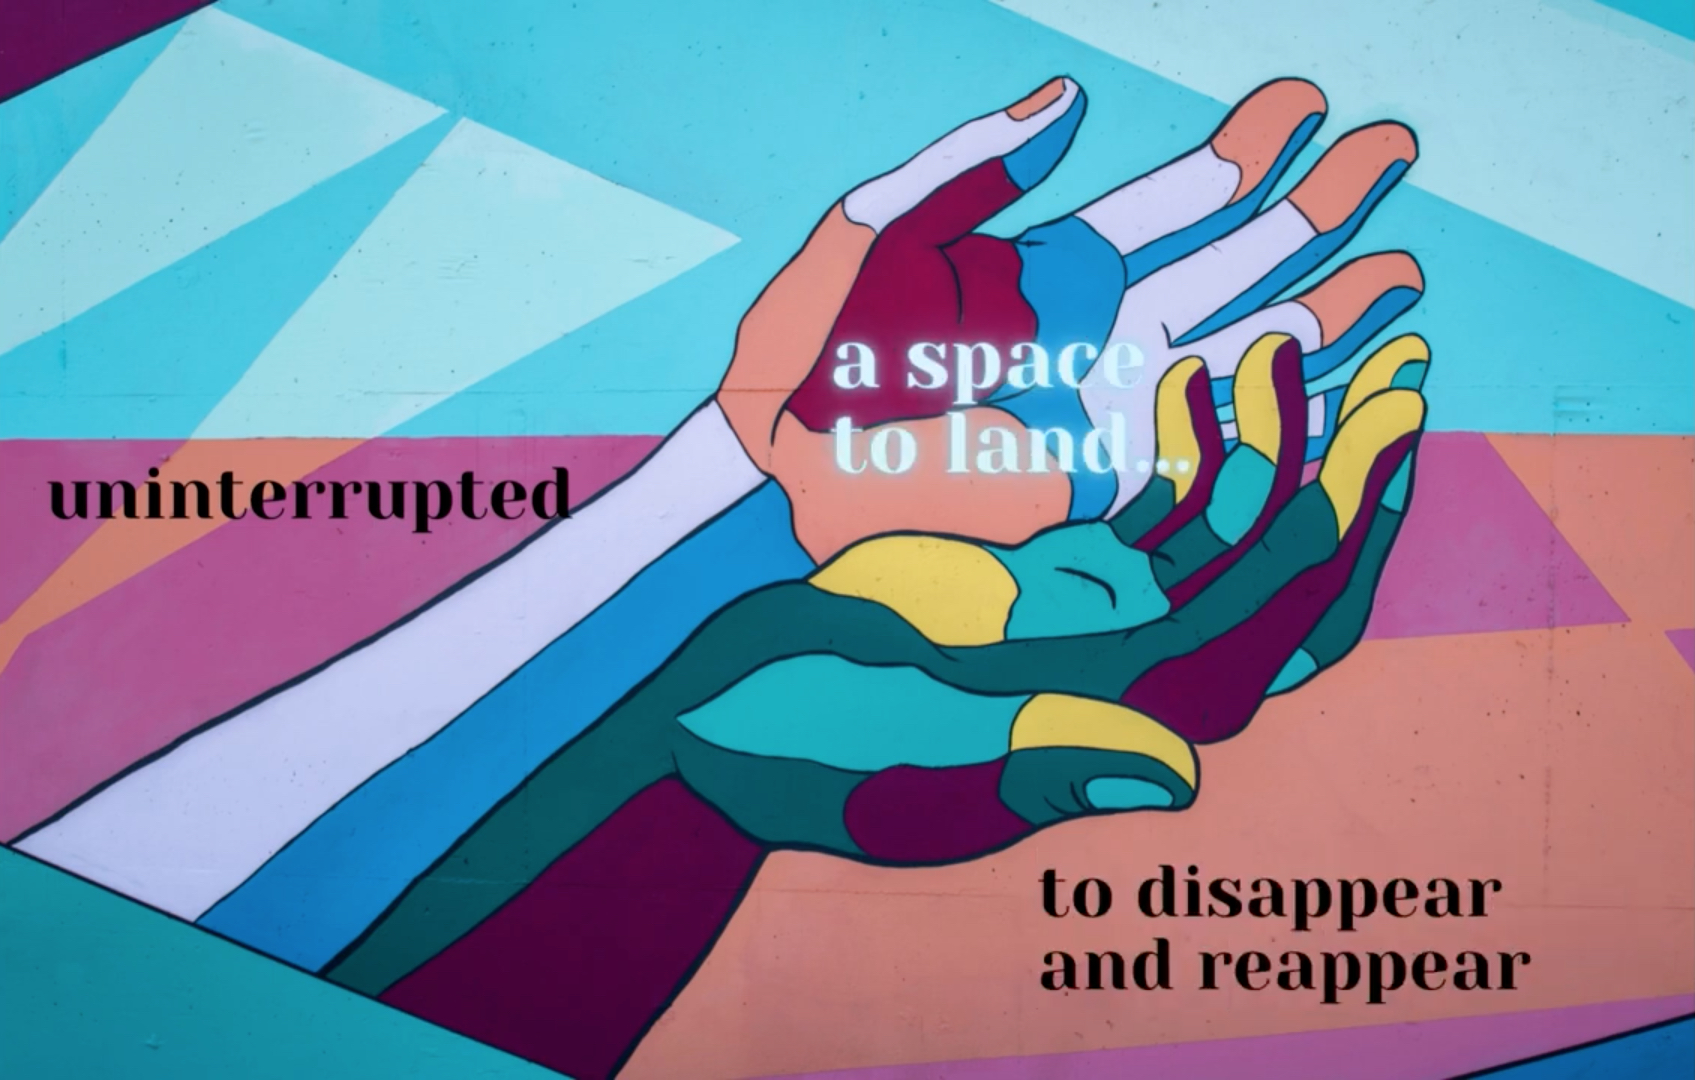 A video still frame shows a drawing of outstretched hands, rendered in a mixed palette of cool and warm colors. Within the frame are also lines of text which say "a space to land...", "uninterrupted", and "to disappear and reappear." The full video is a creative response to the question "How does it feel and what comprises a sustainable, supportive, care-filled healthy arts ecosystem?" Still frame from a video by Jamila Kinney.